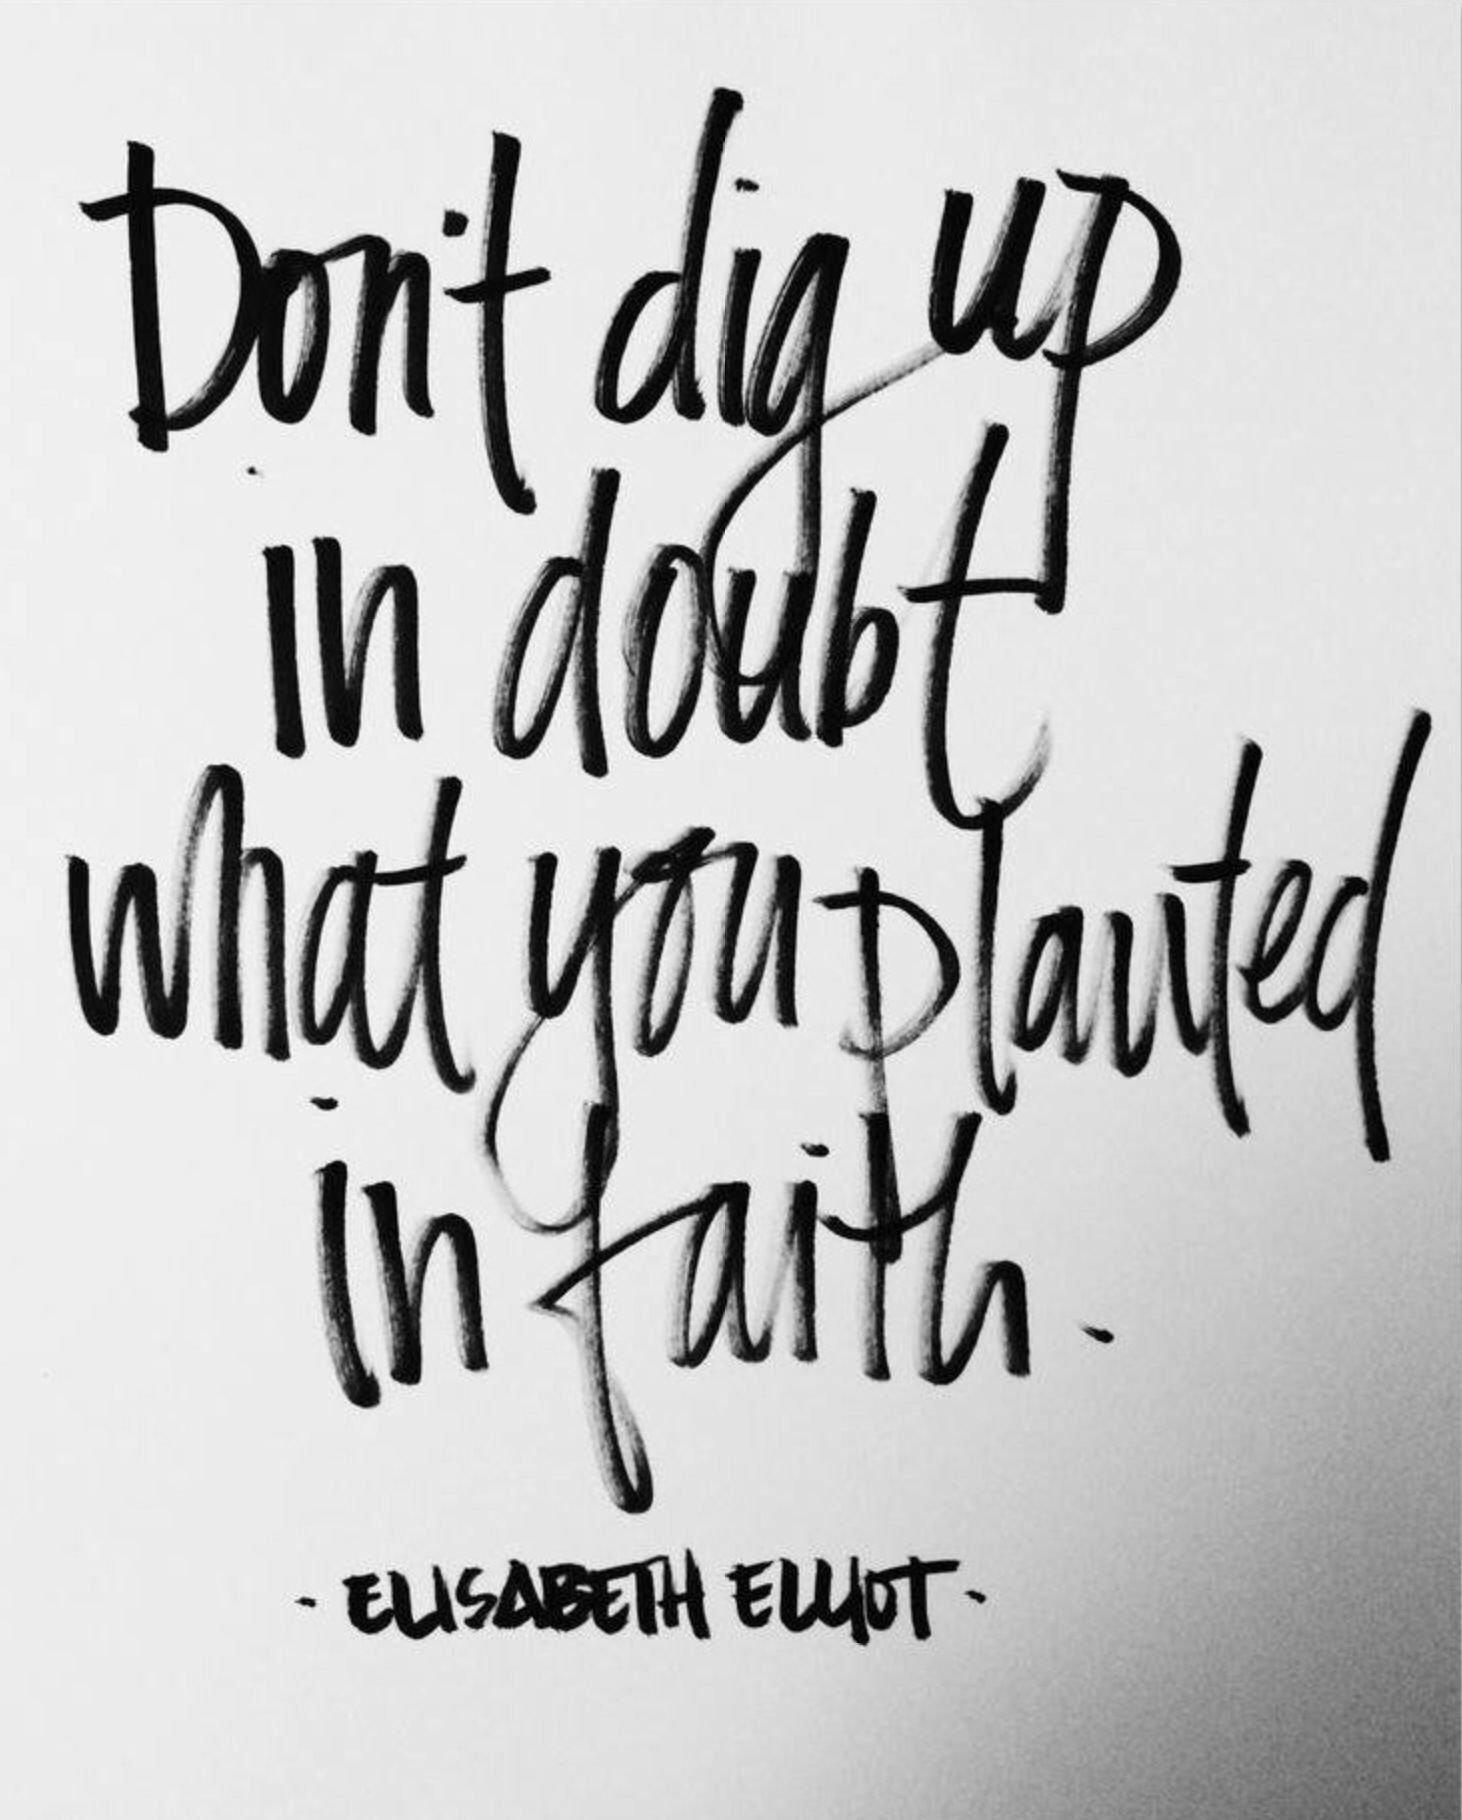 Don't dig up in doubt what you planted in faith. Elisabeth Elliot